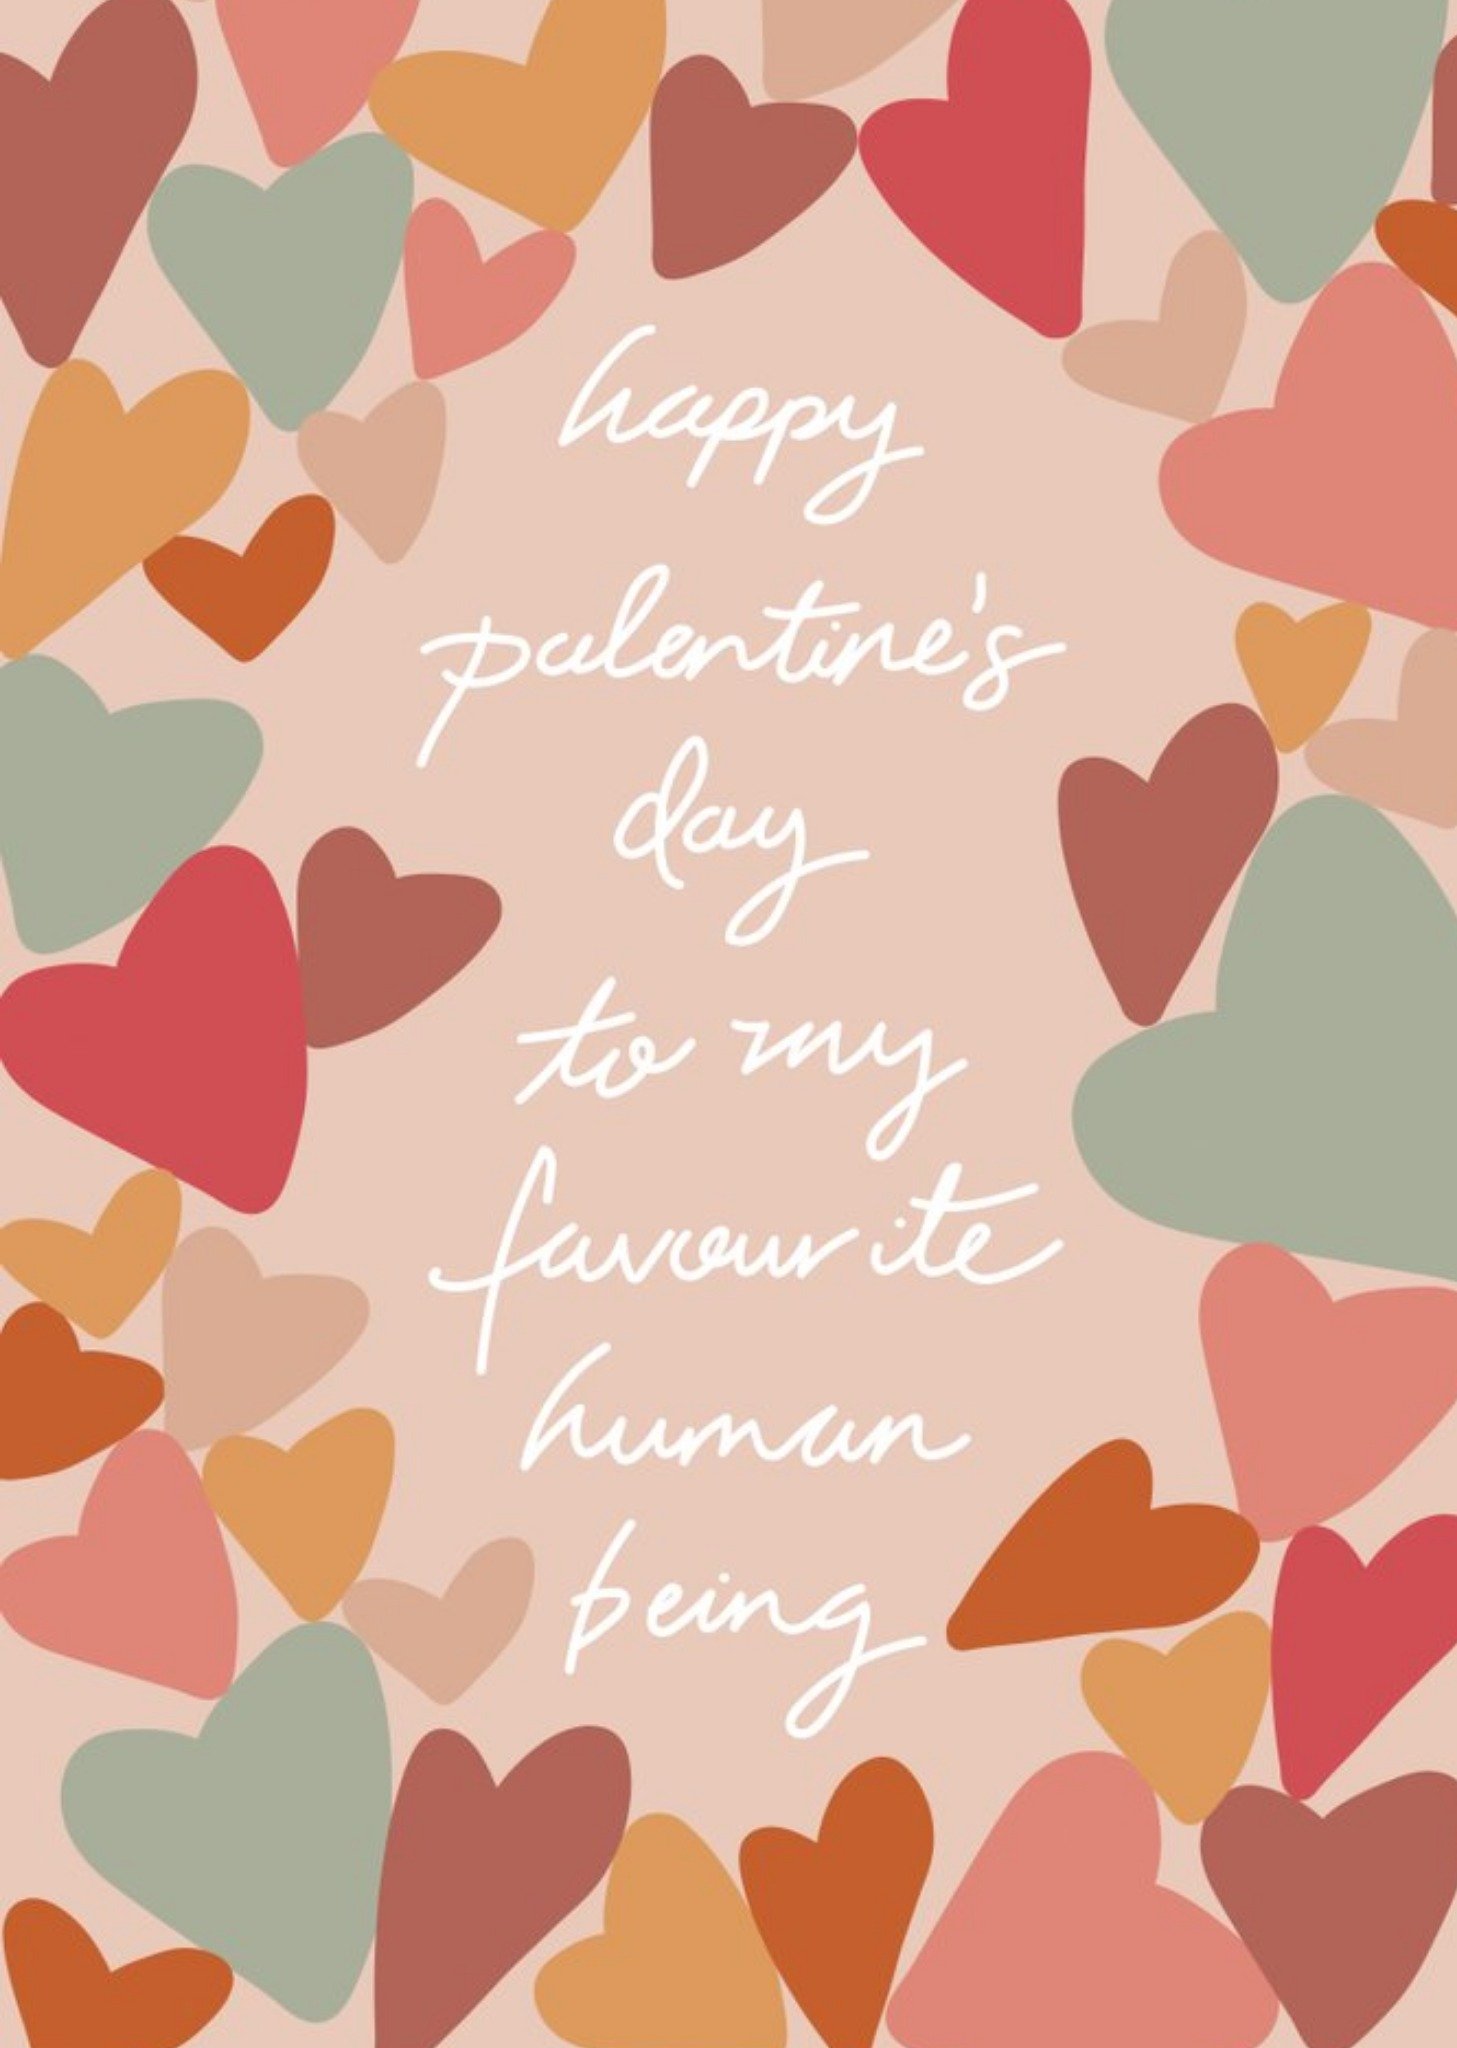 Moonpig Meaningful Messages Happy Palentines Day To My Favourite Human Valentines Day Card Ecard